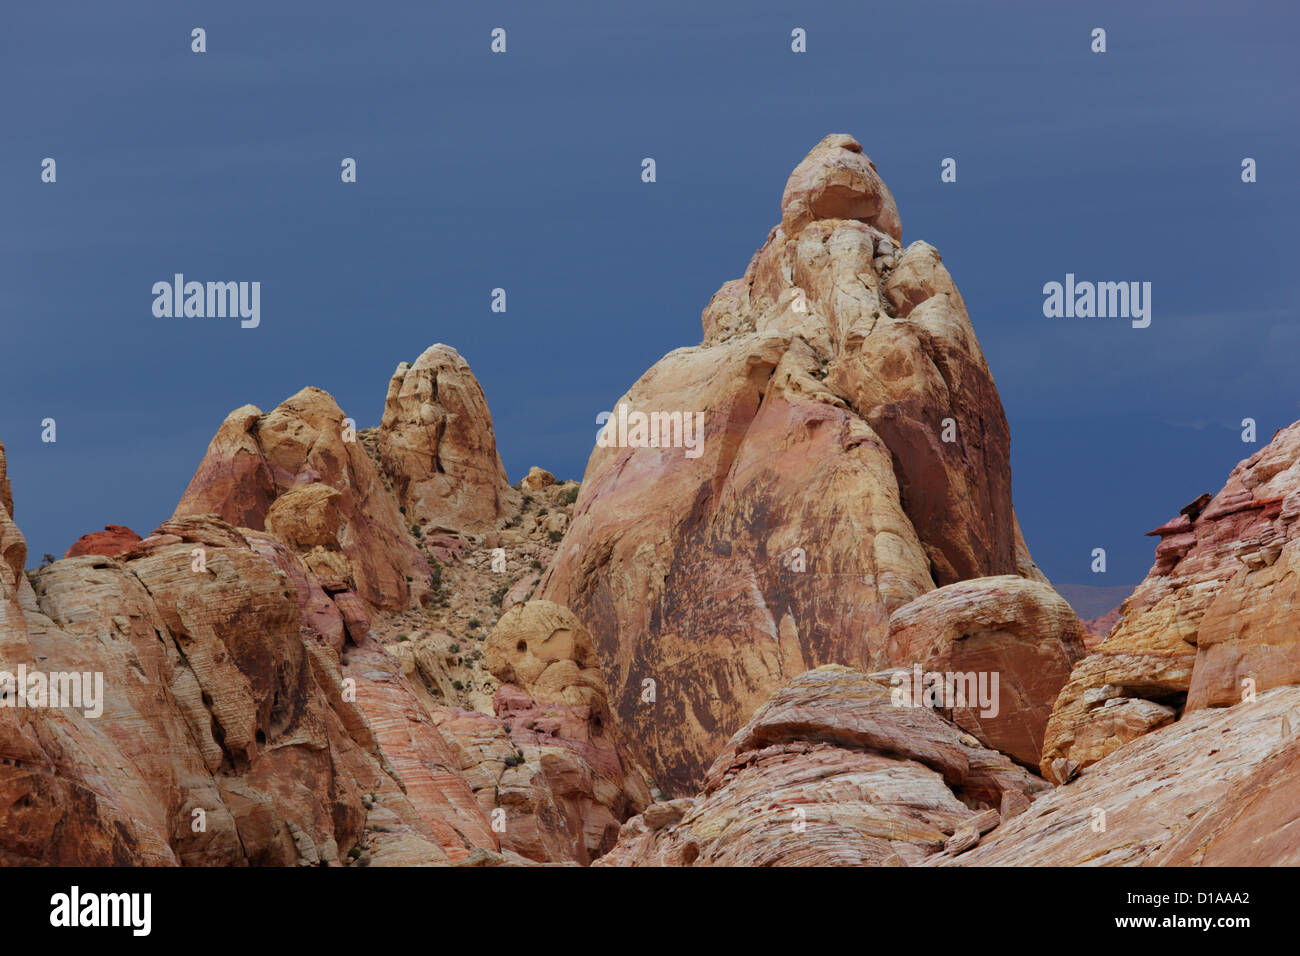 Sandstone formation, Valley of Fire State Park, Nevada, USA. Stock Photo